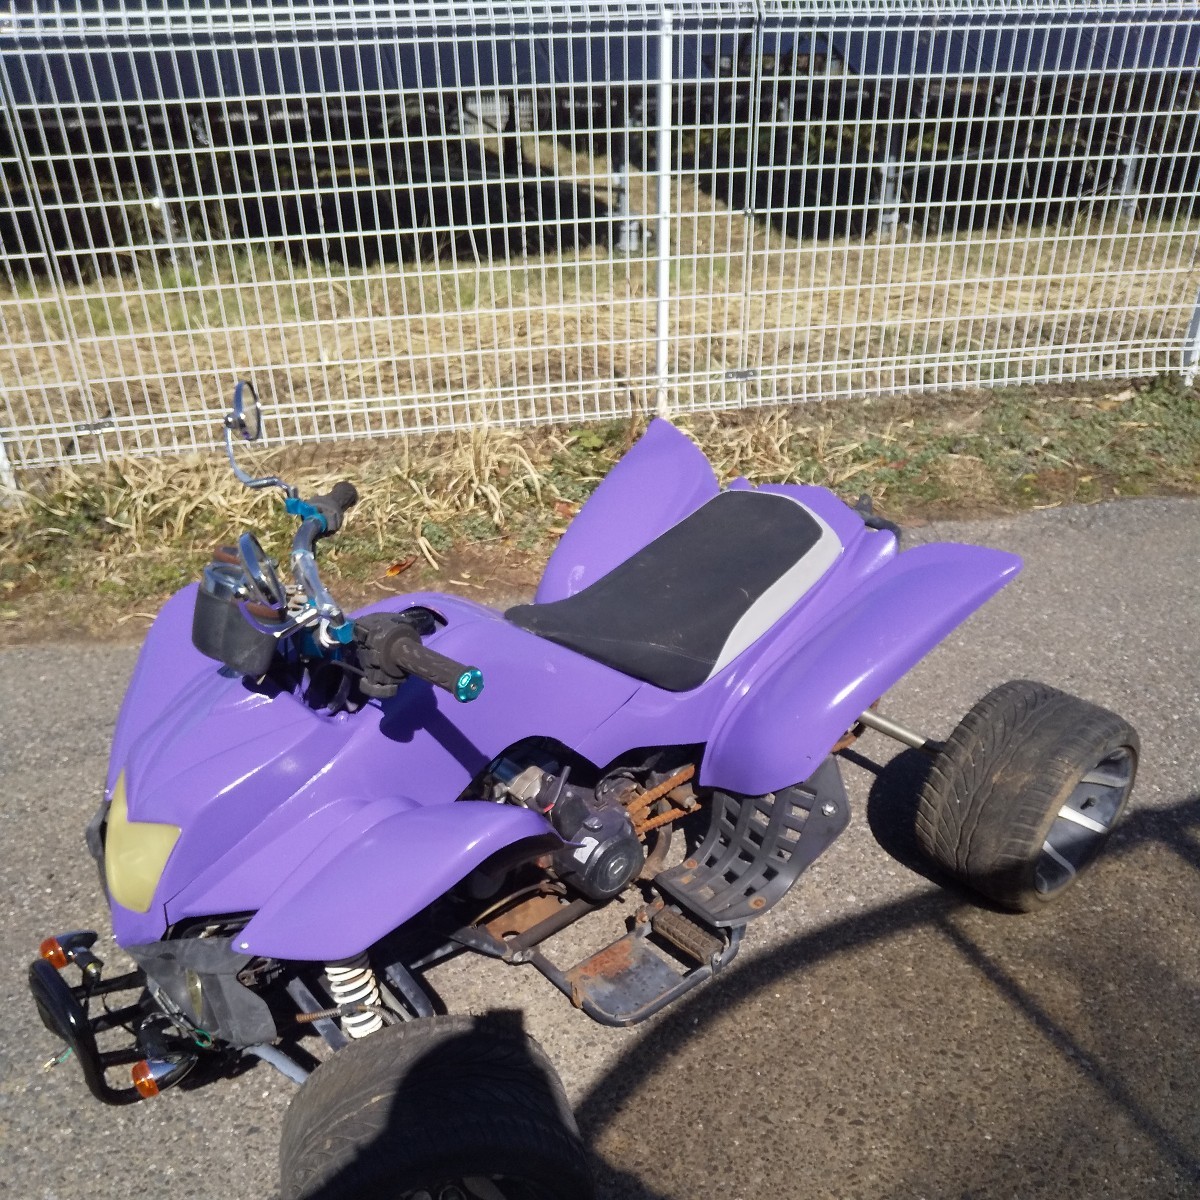  Chinese buggy 50cc centrifugal finishing on the way Junk second . Evangelion manner 